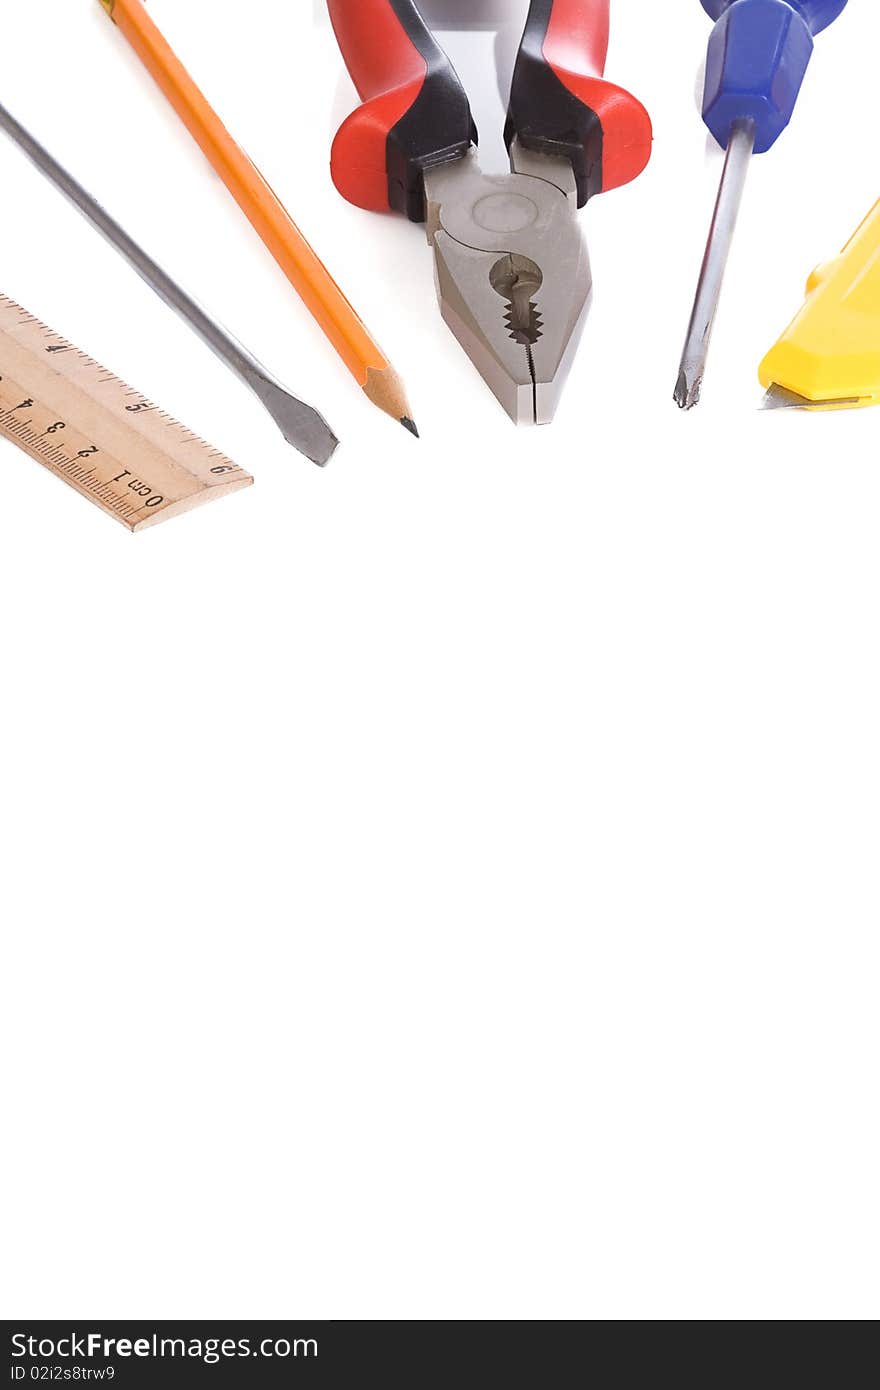 Isolated tools over white background